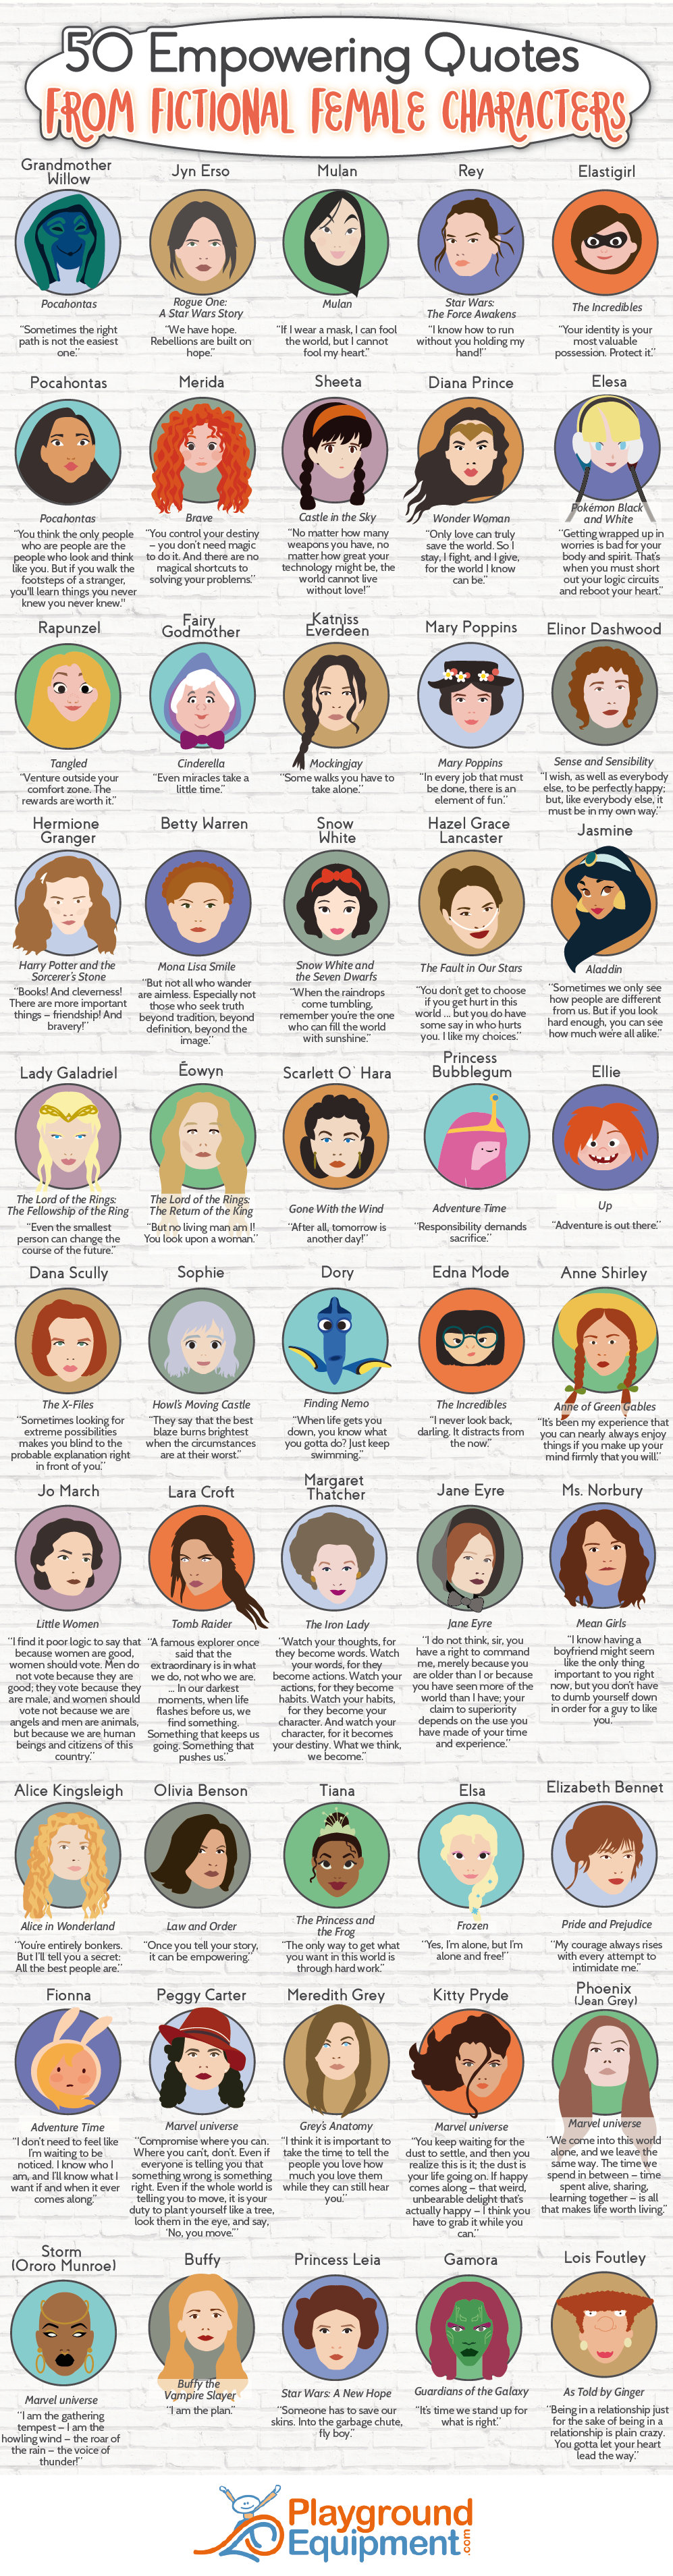 50 empowering quotes from fictional female characters 4